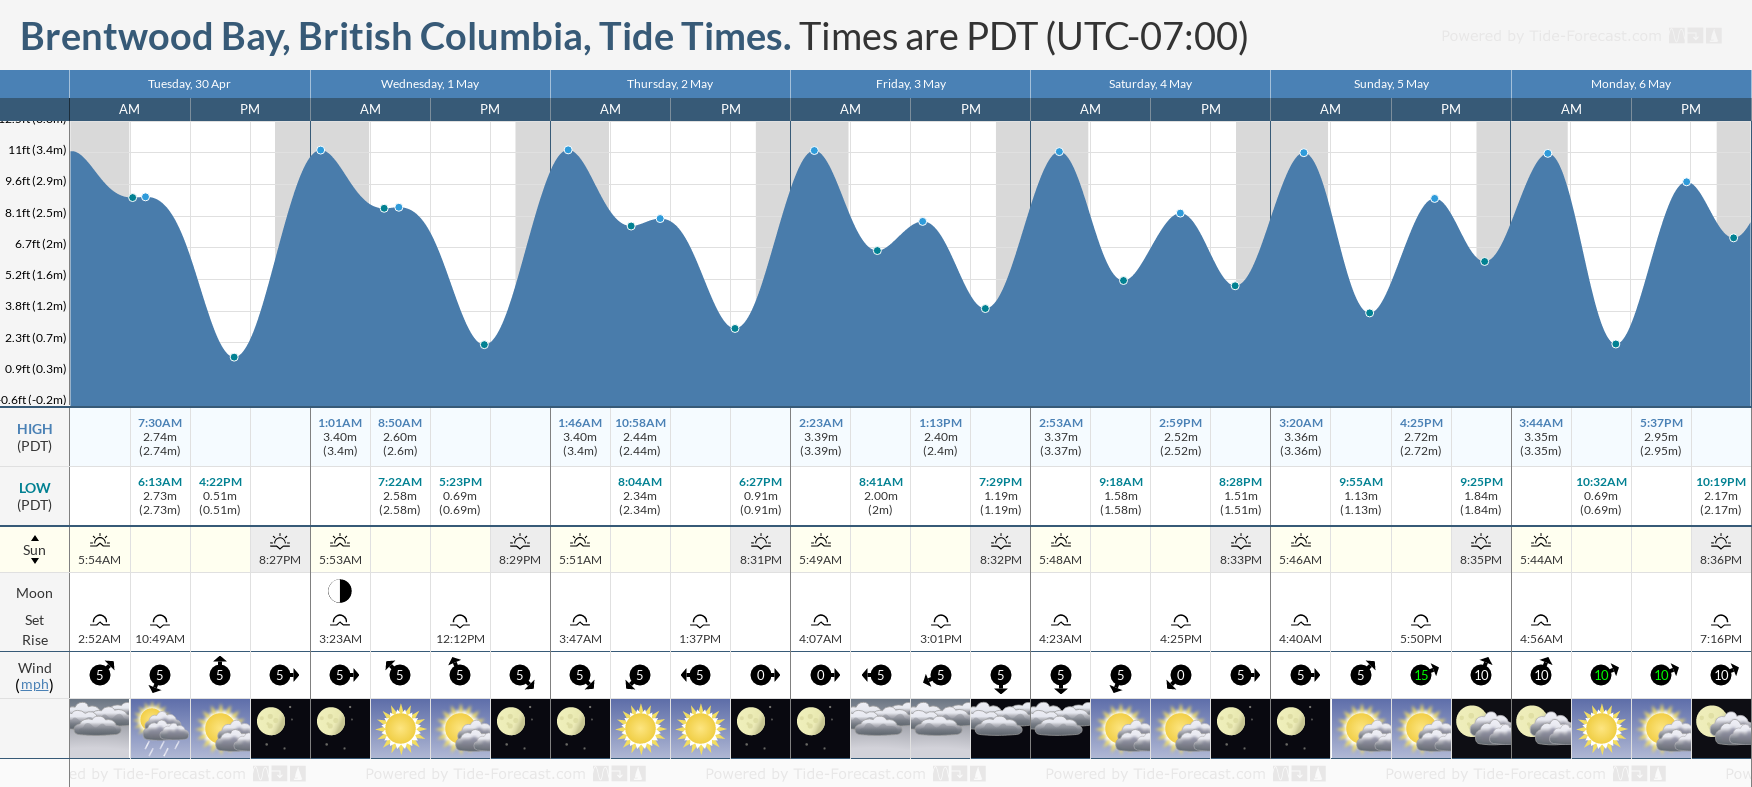 Brentwood Bay, British Columbia Tide Chart including high and low tide times for the next 7 days